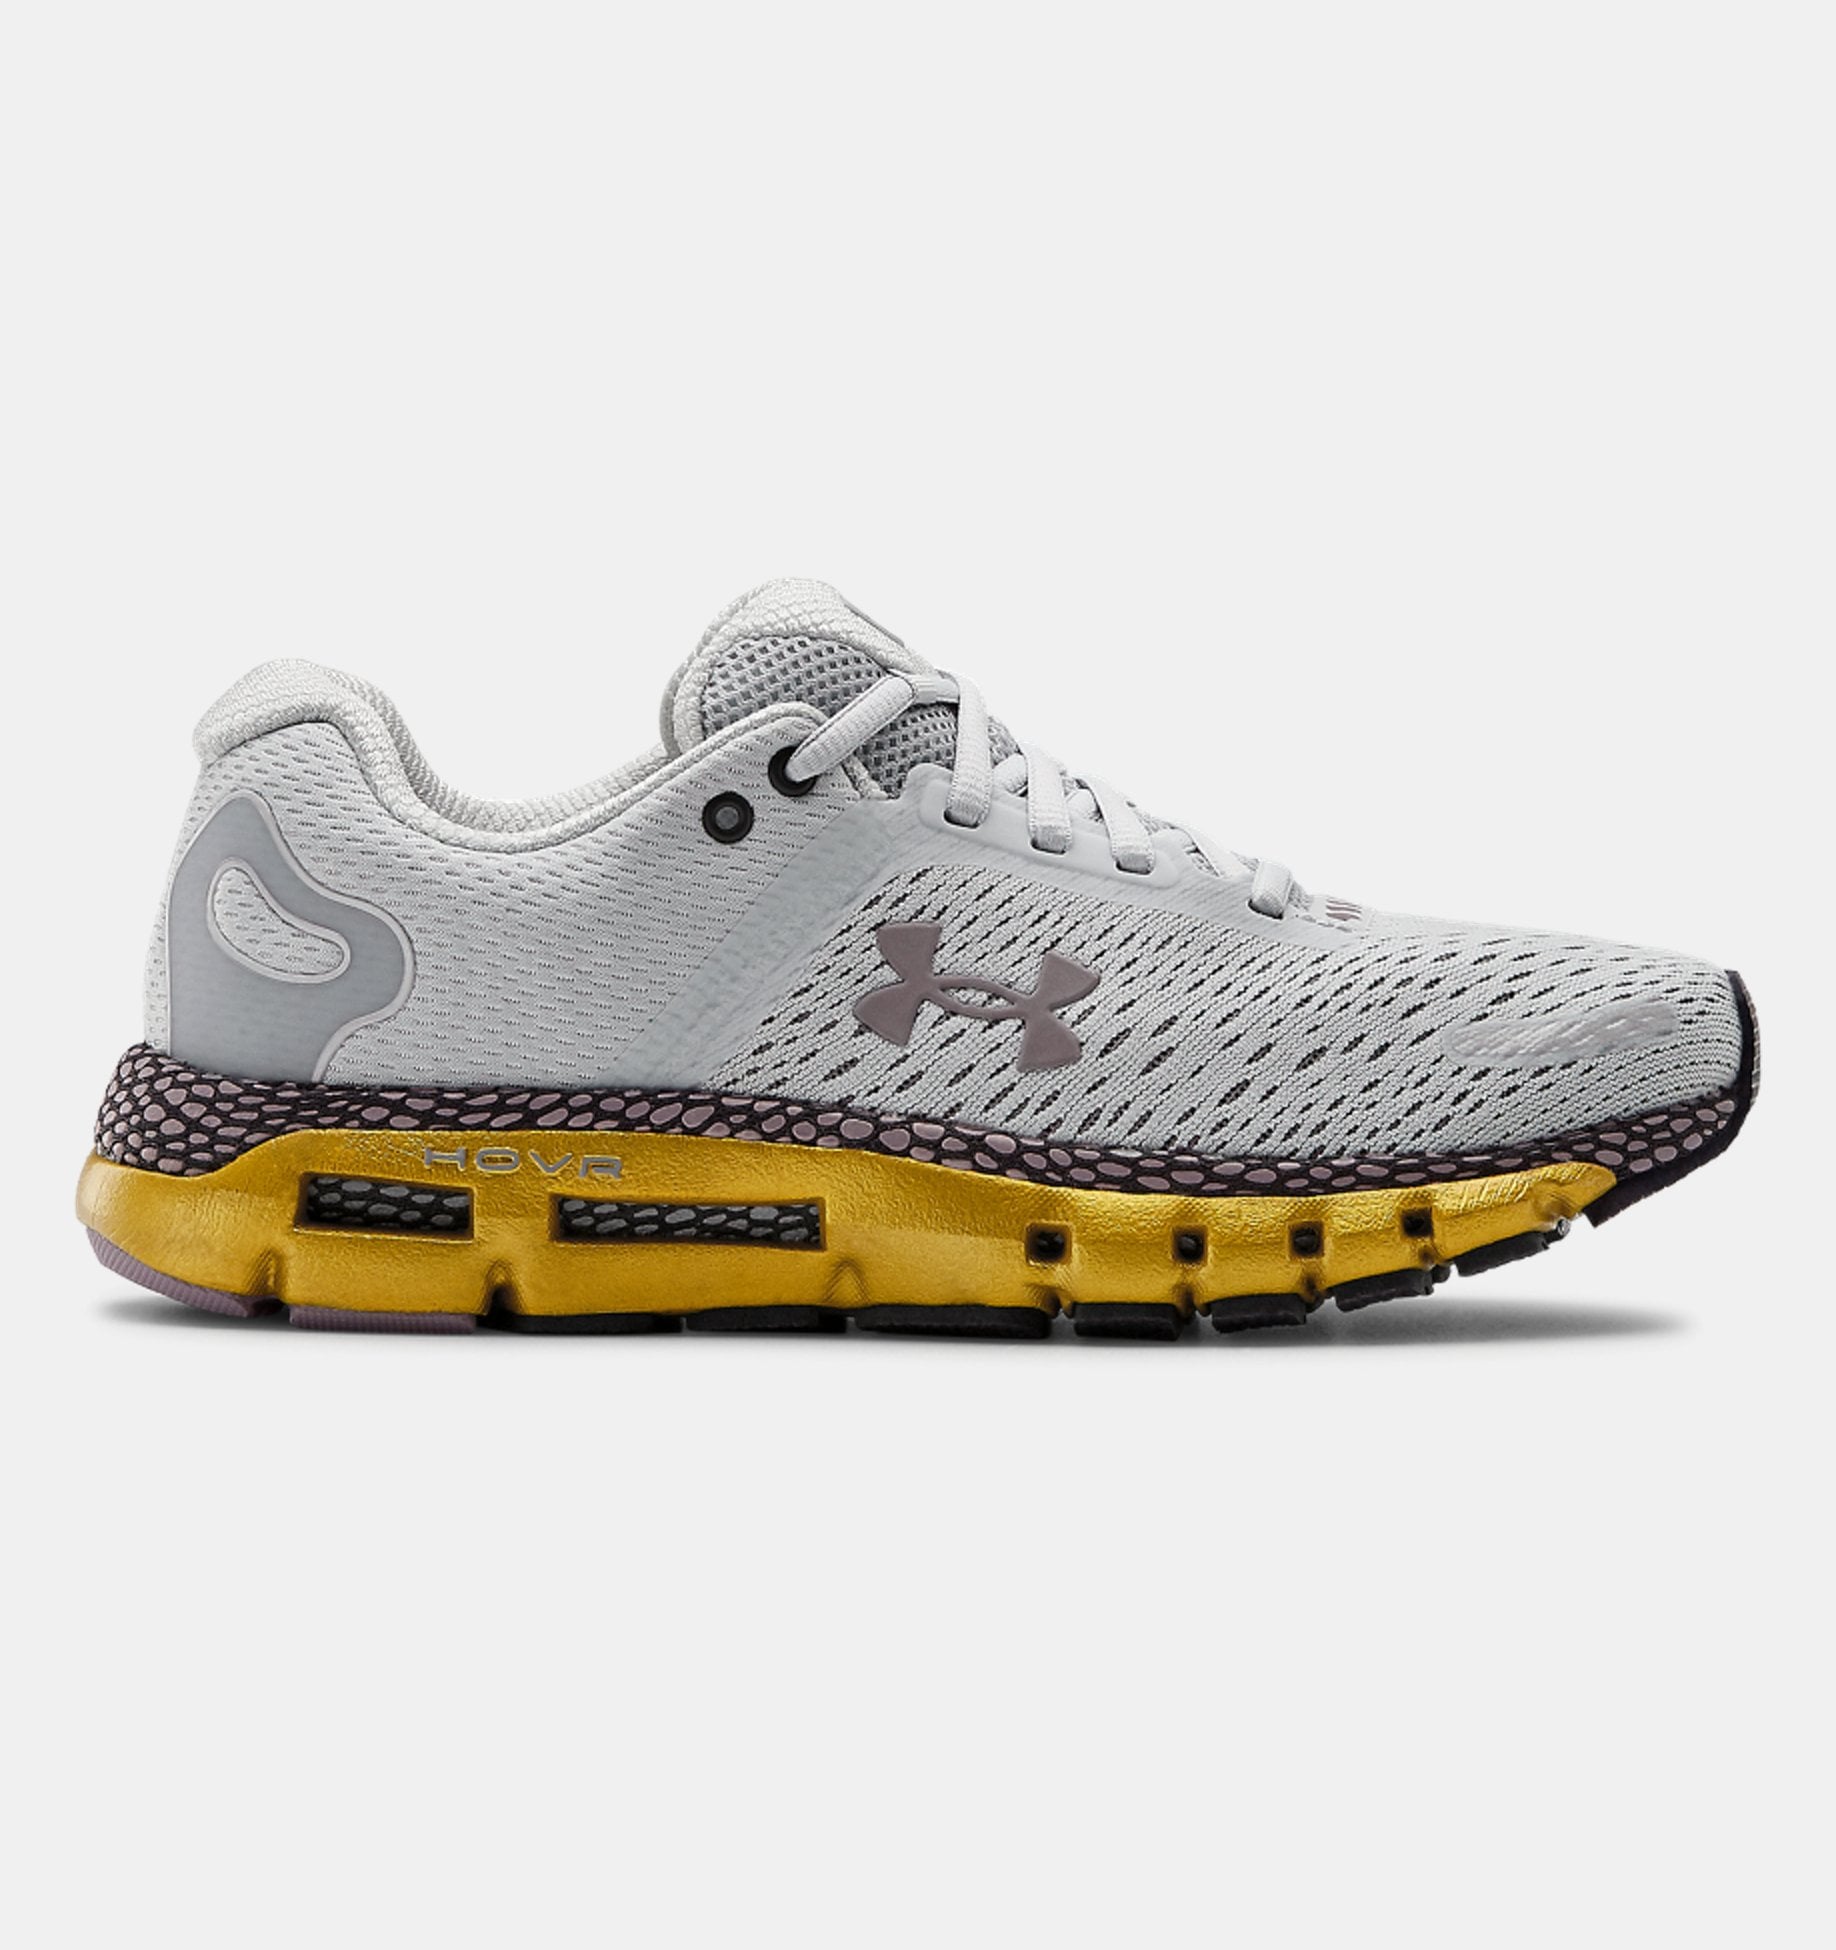 Buy > under armour gold shoes > in stock